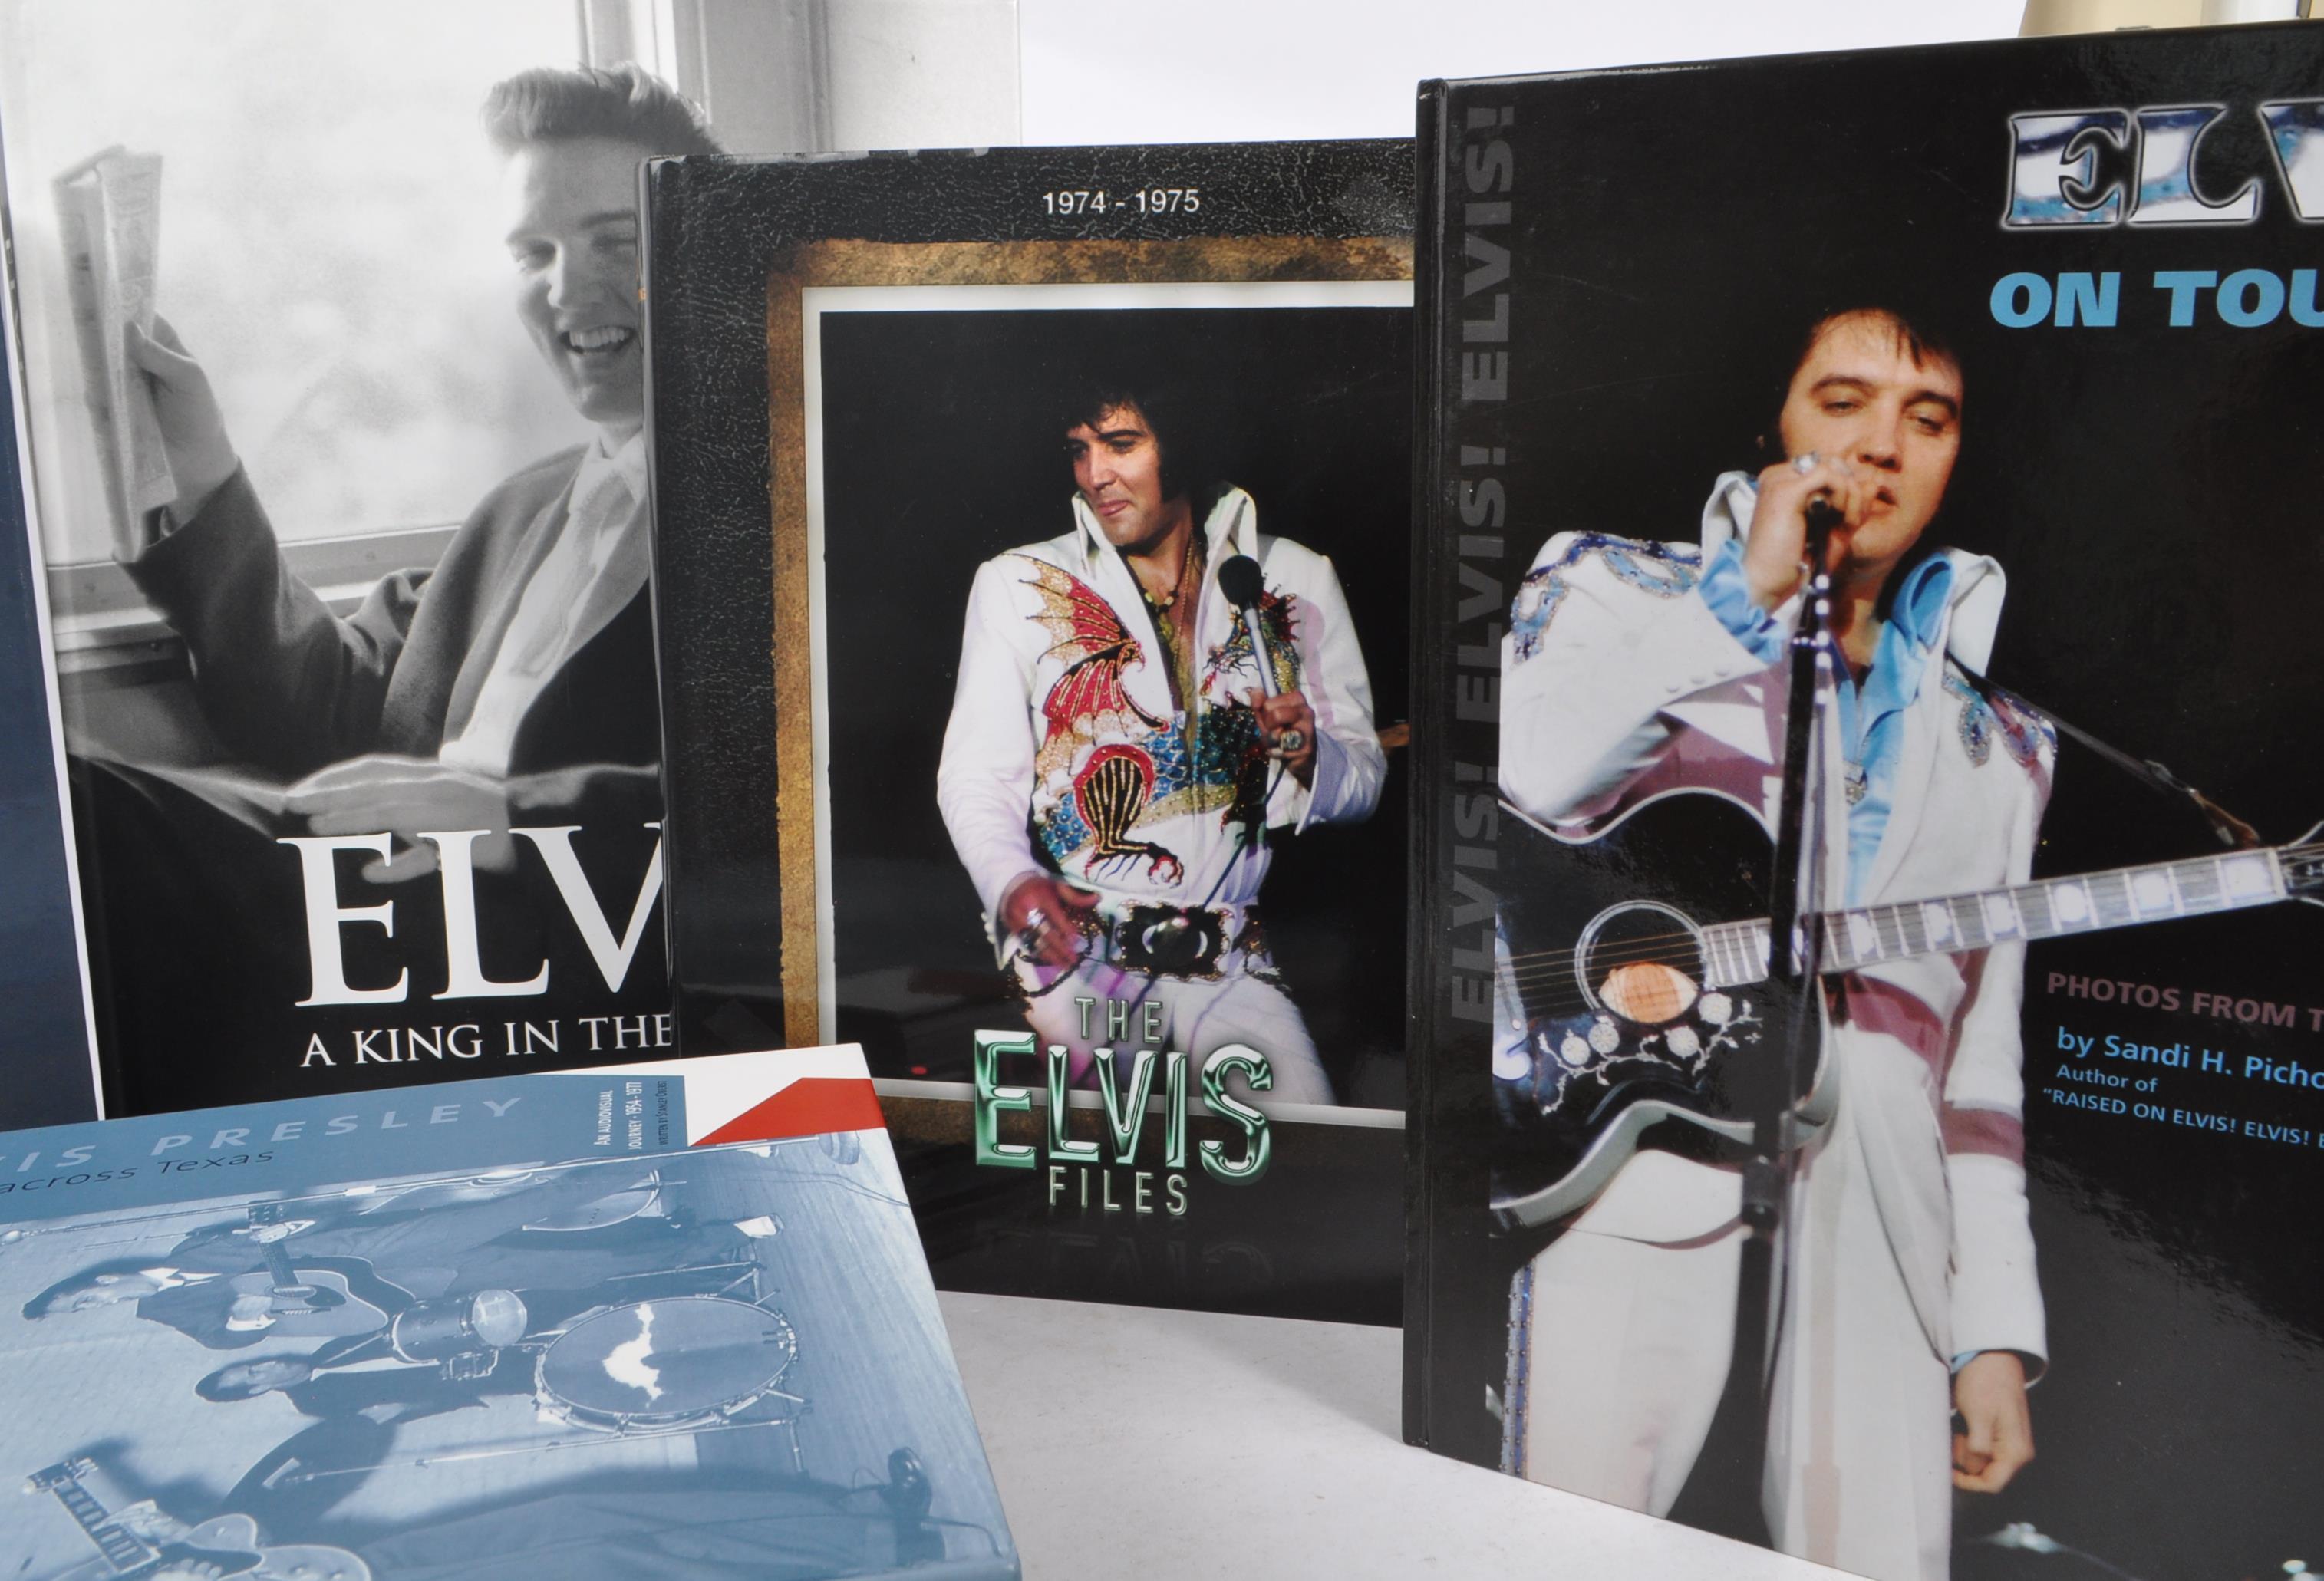 ELVIS PRESLEY - COLLECTION OF ROCK N ROLL MUSIC BOOKS - Image 4 of 7